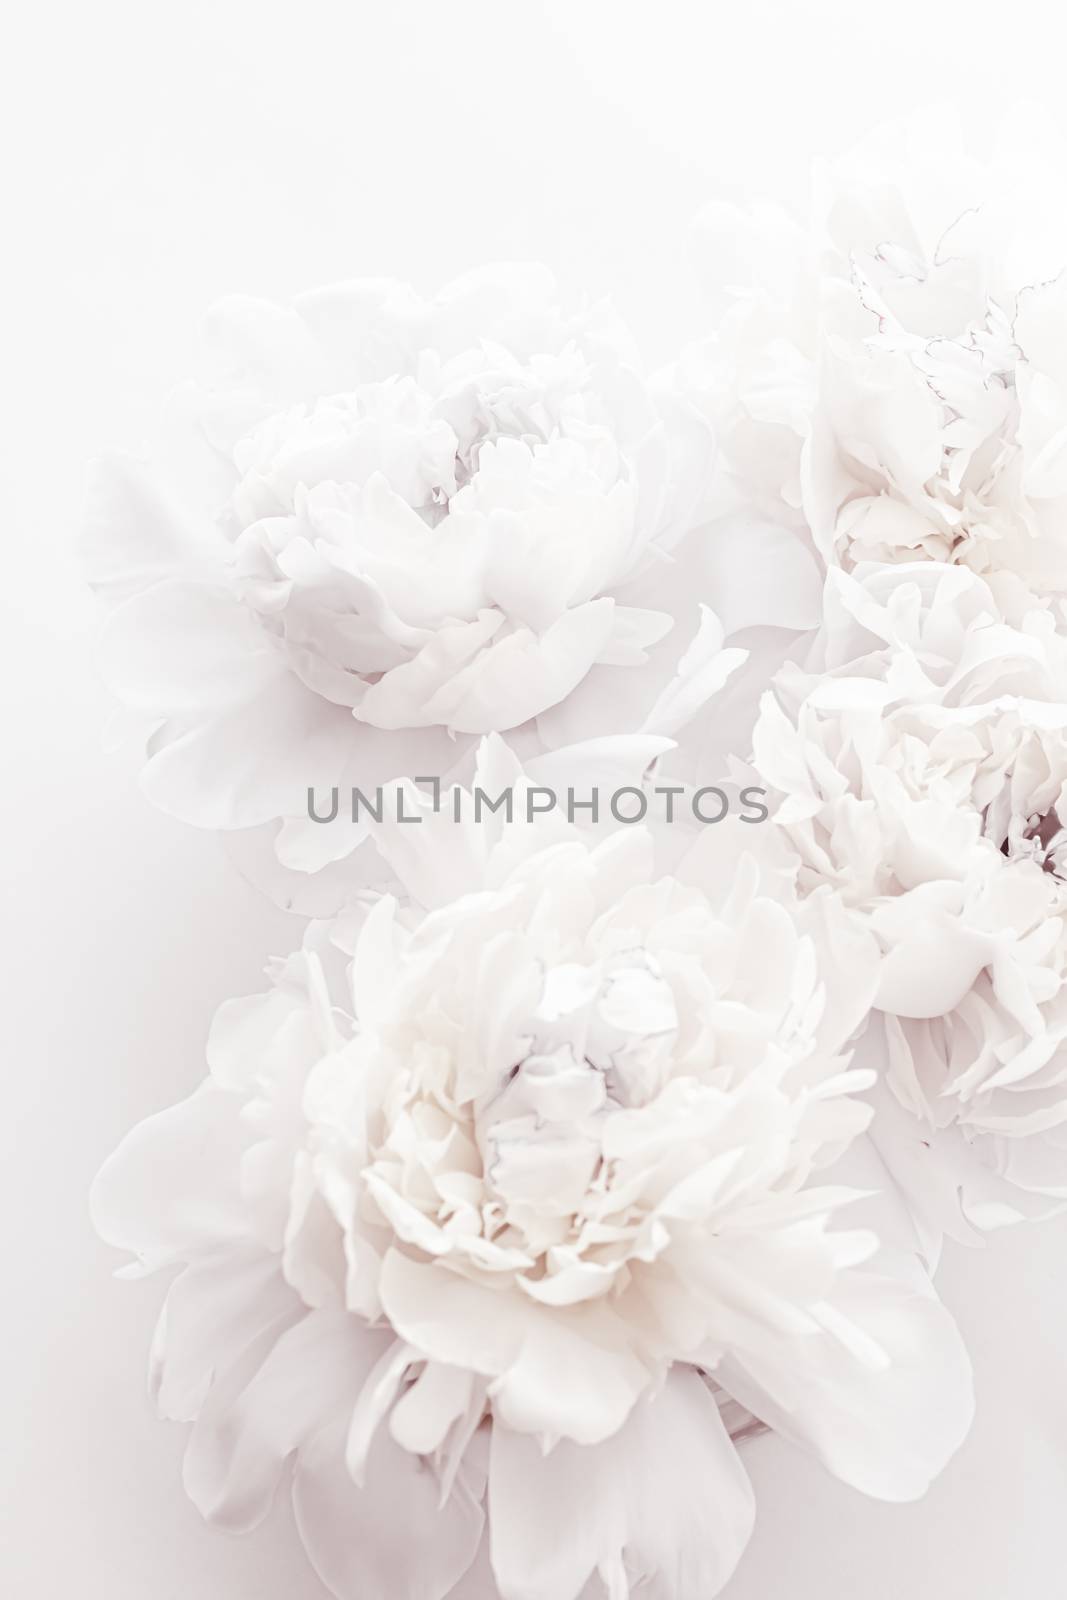 Pure white peony flowers as floral art background, wedding decor and luxury branding by Anneleven